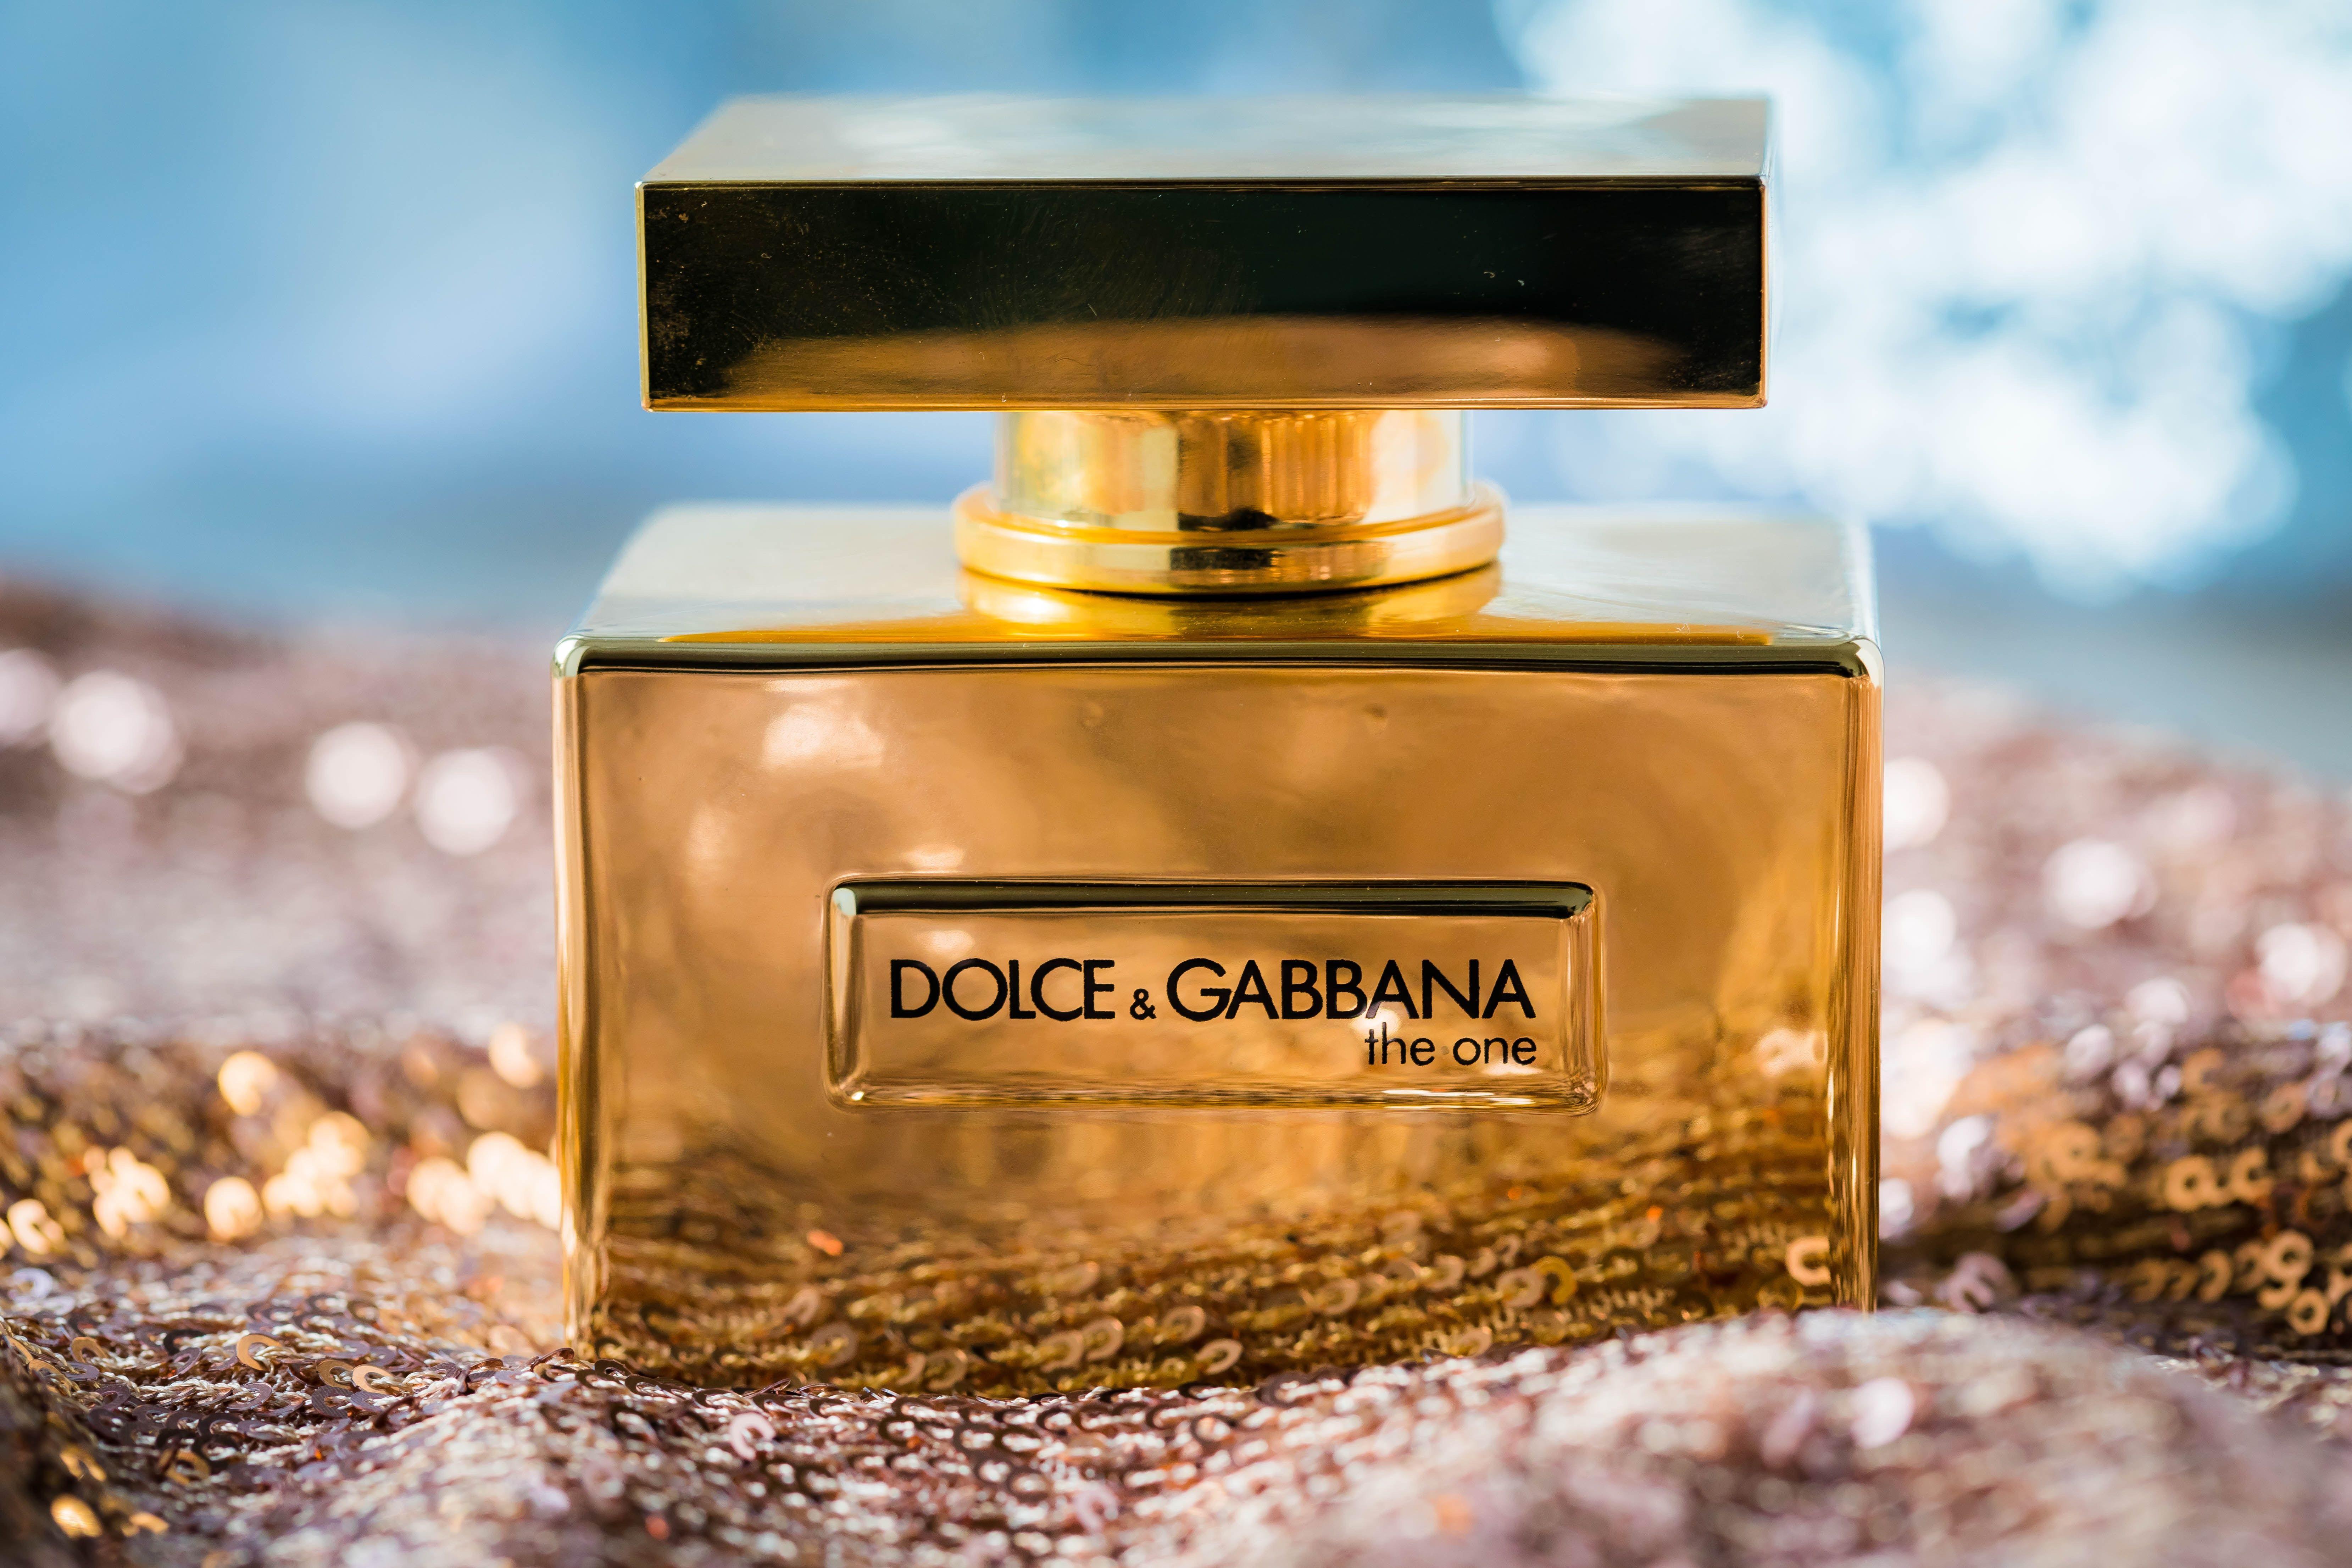 Dolce and Gabbana Wallpaper 4k Download 6633x4422